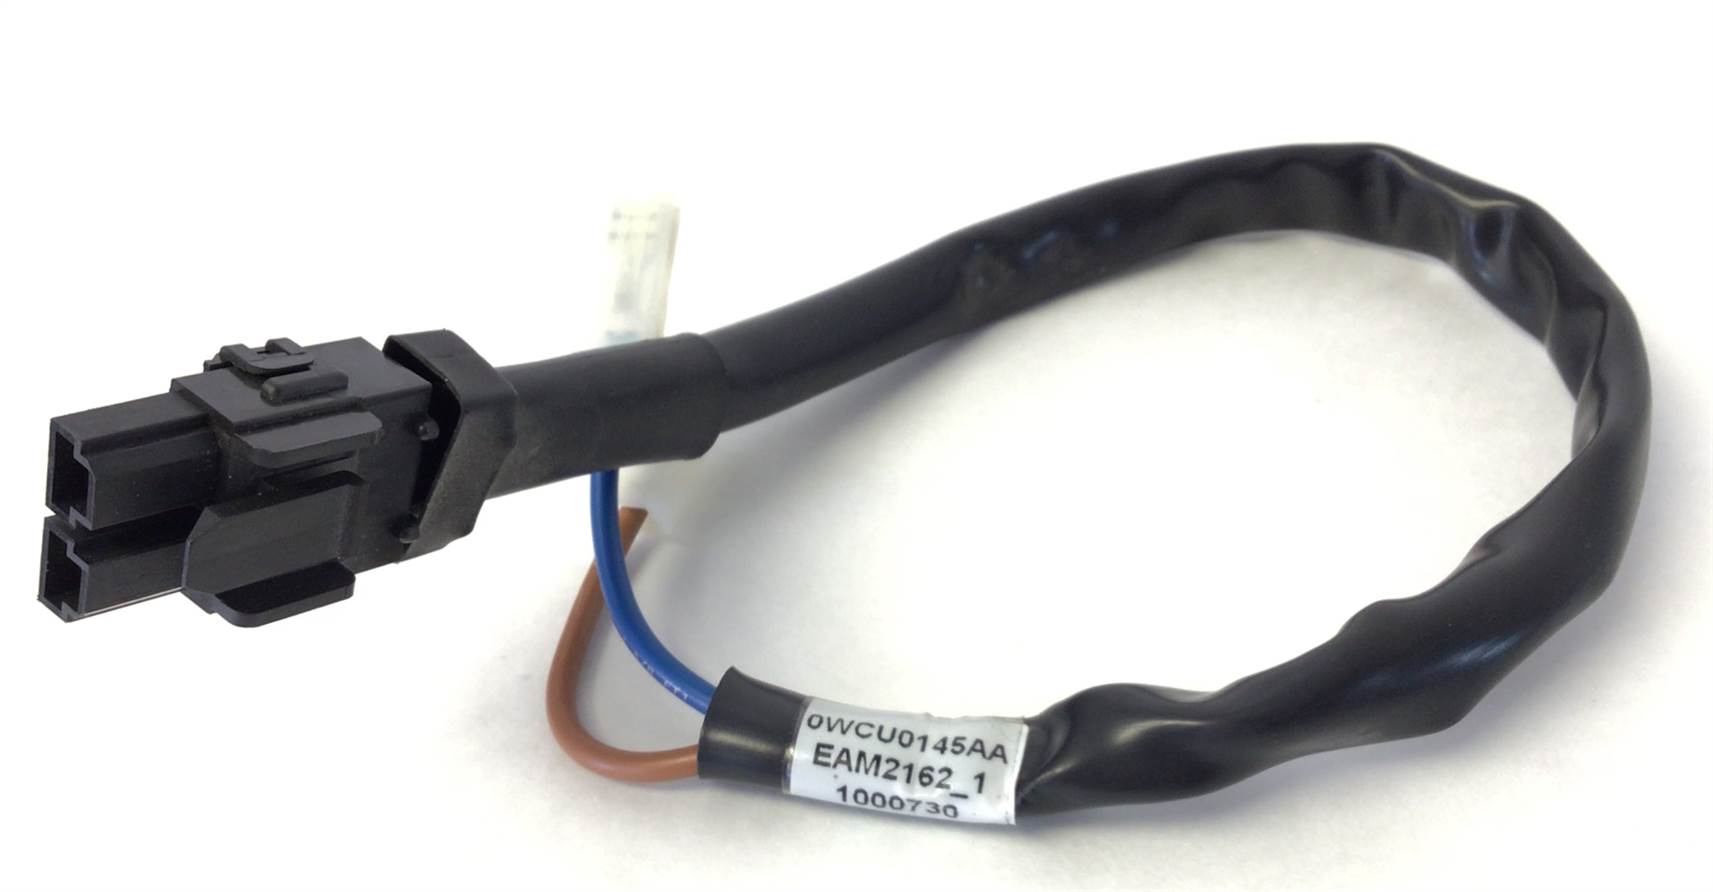 Internal Power Wire Harness Cable For Power Box (Used)